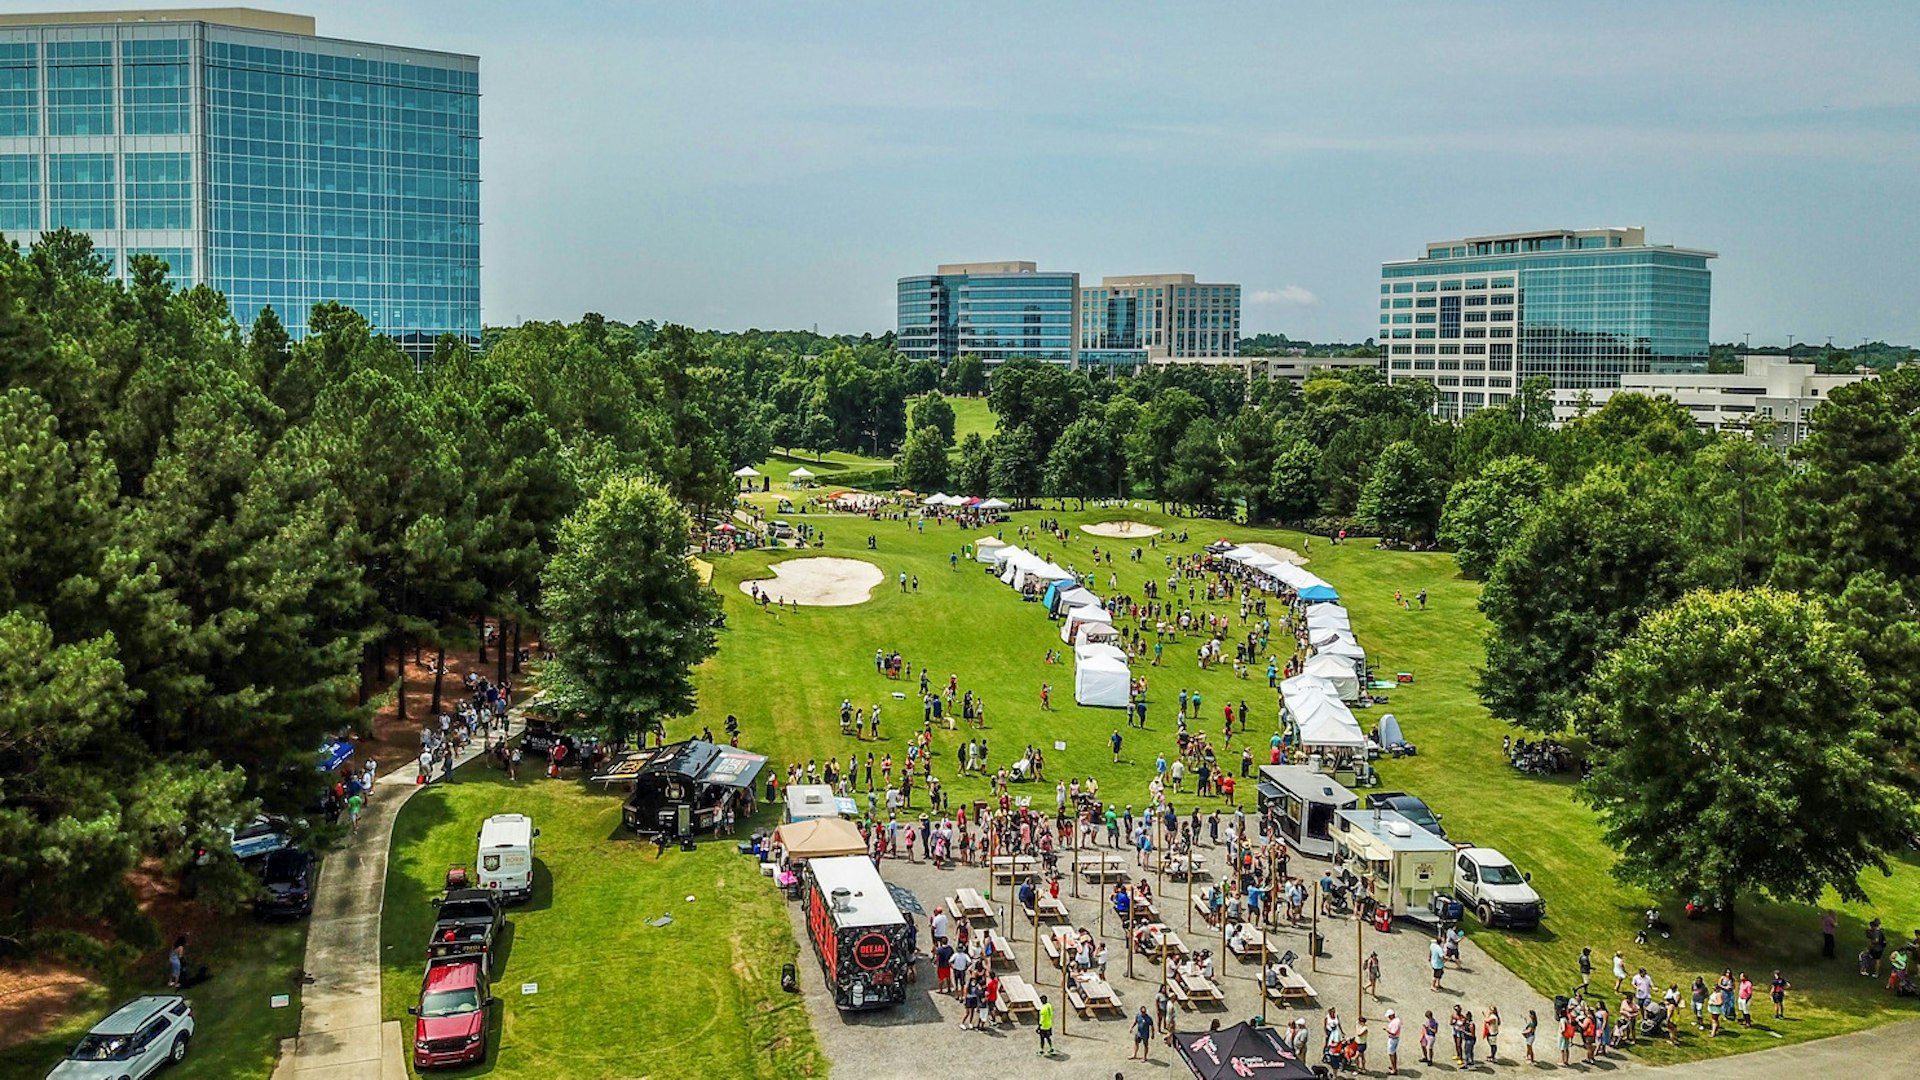 Drone view of Markets at 11 in Ballantyne's Backyard